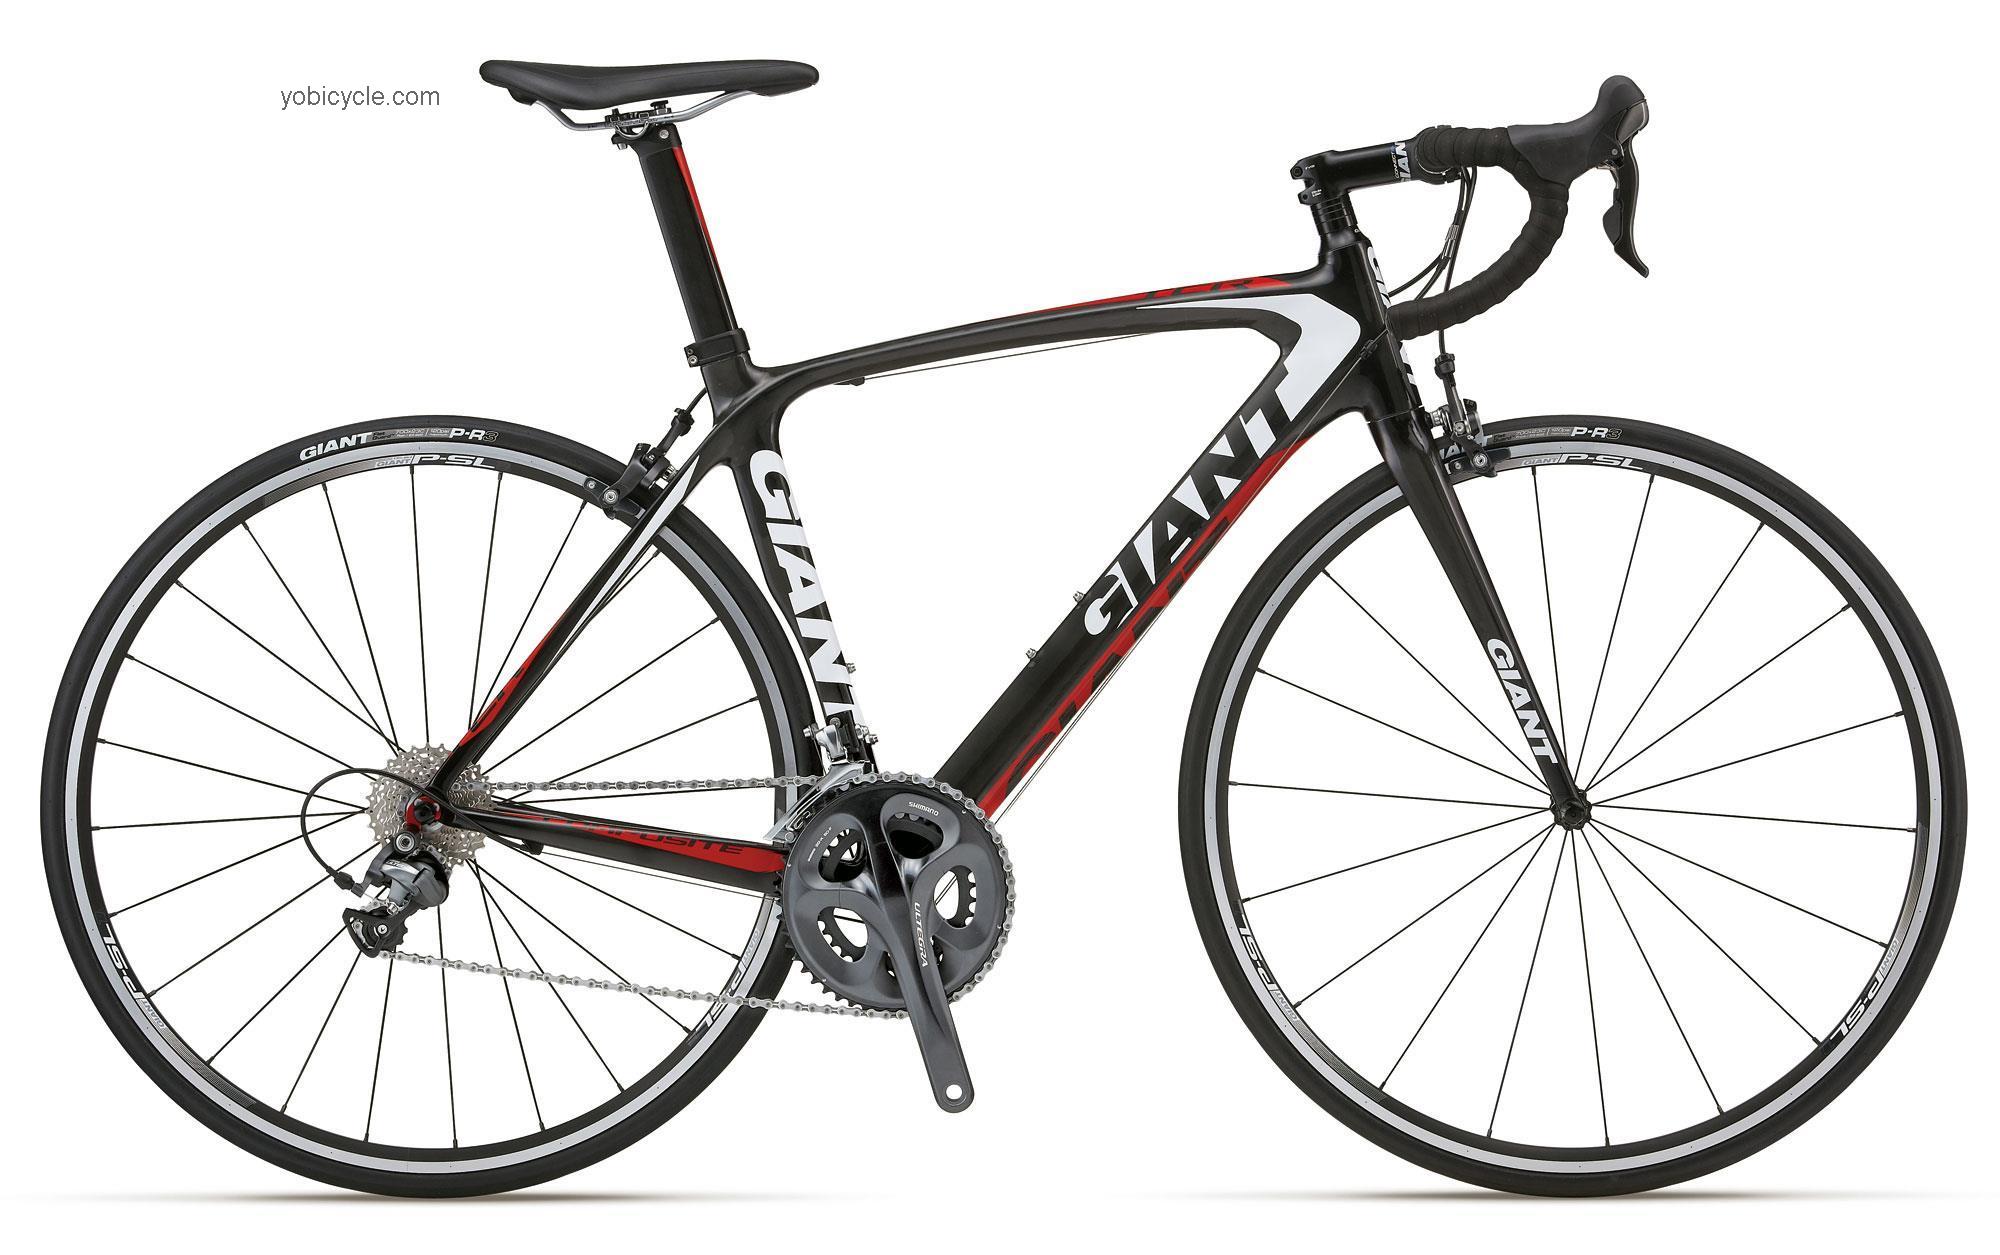 Giant TCR Composite 1 Compact 2012 comparison online with competitors